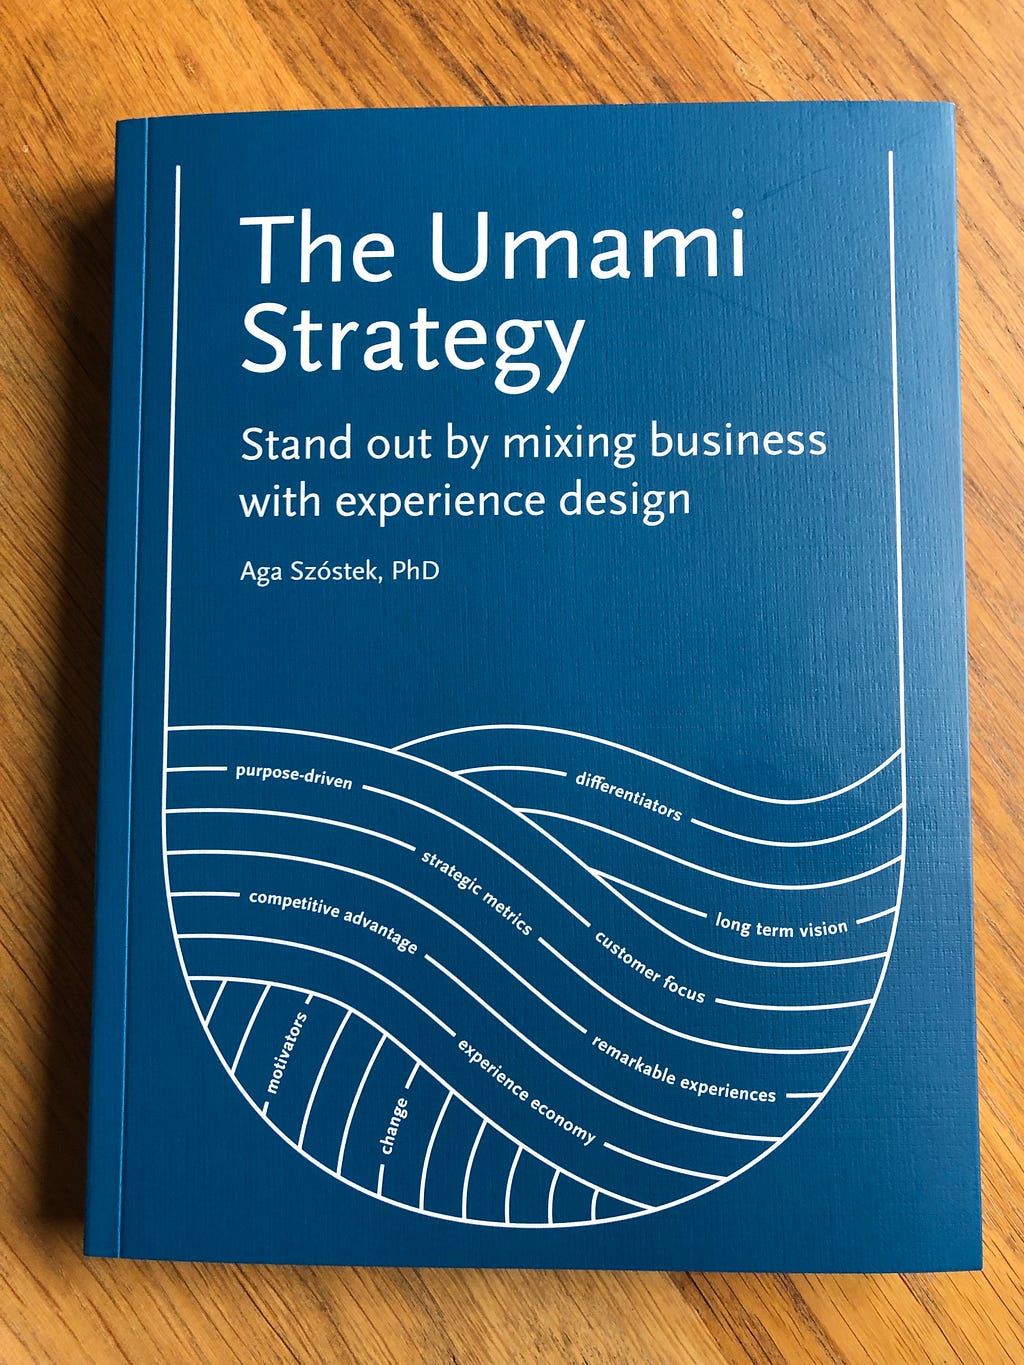 The book “The Umami Strategy: Stand out by mixing business with experience design” laying on a table